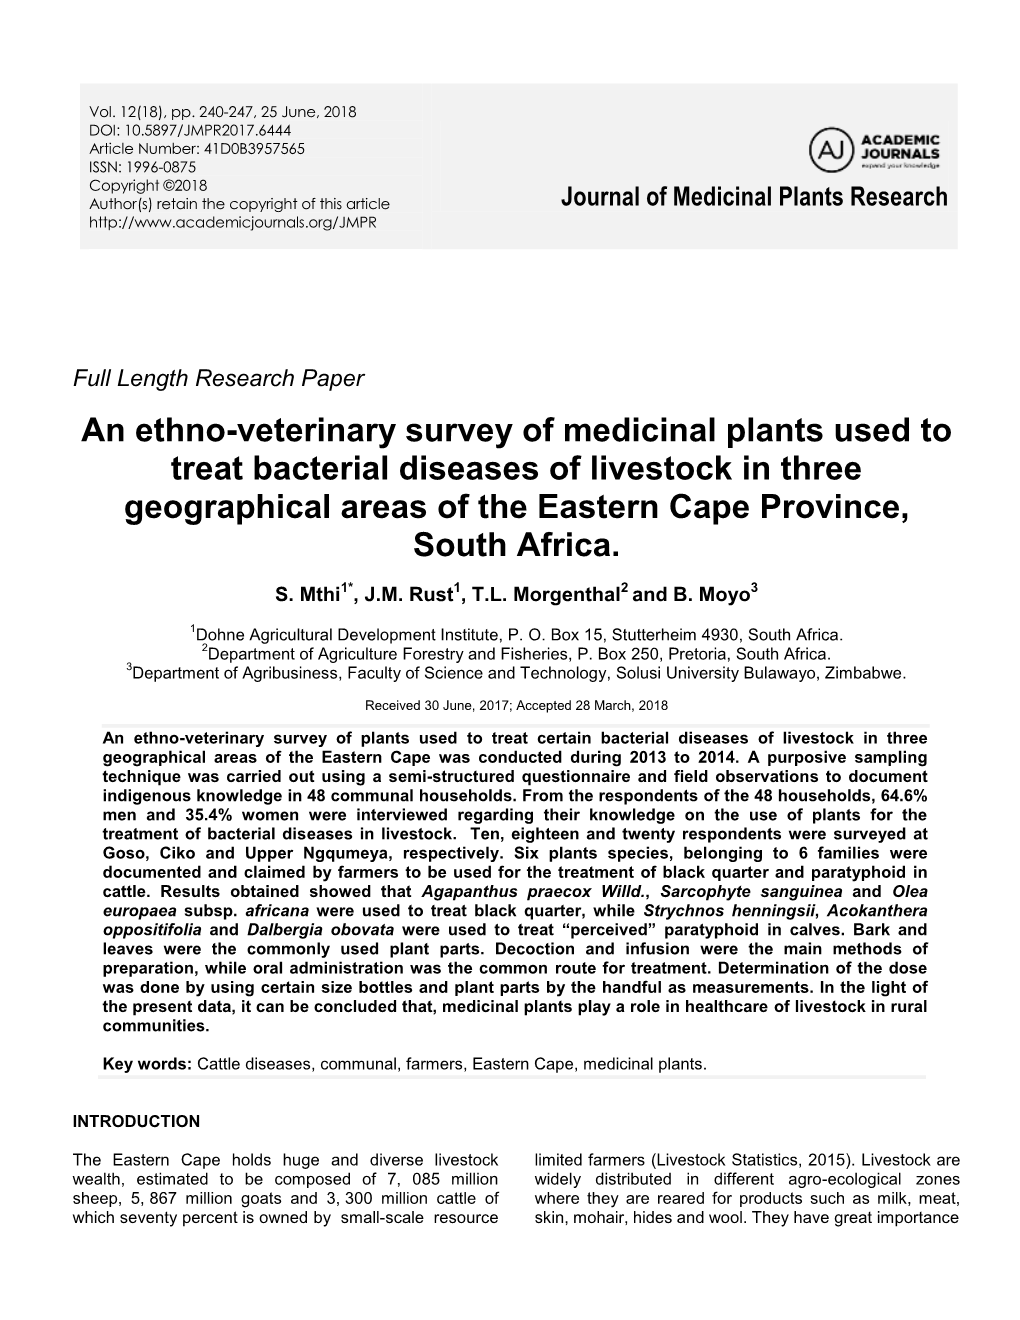 An Ethno-Veterinary Survey of Medicinal Plants Used to Treat Bacterial Diseases of Livestock in Three Geographical Areas of the Eastern Cape Province, South Africa